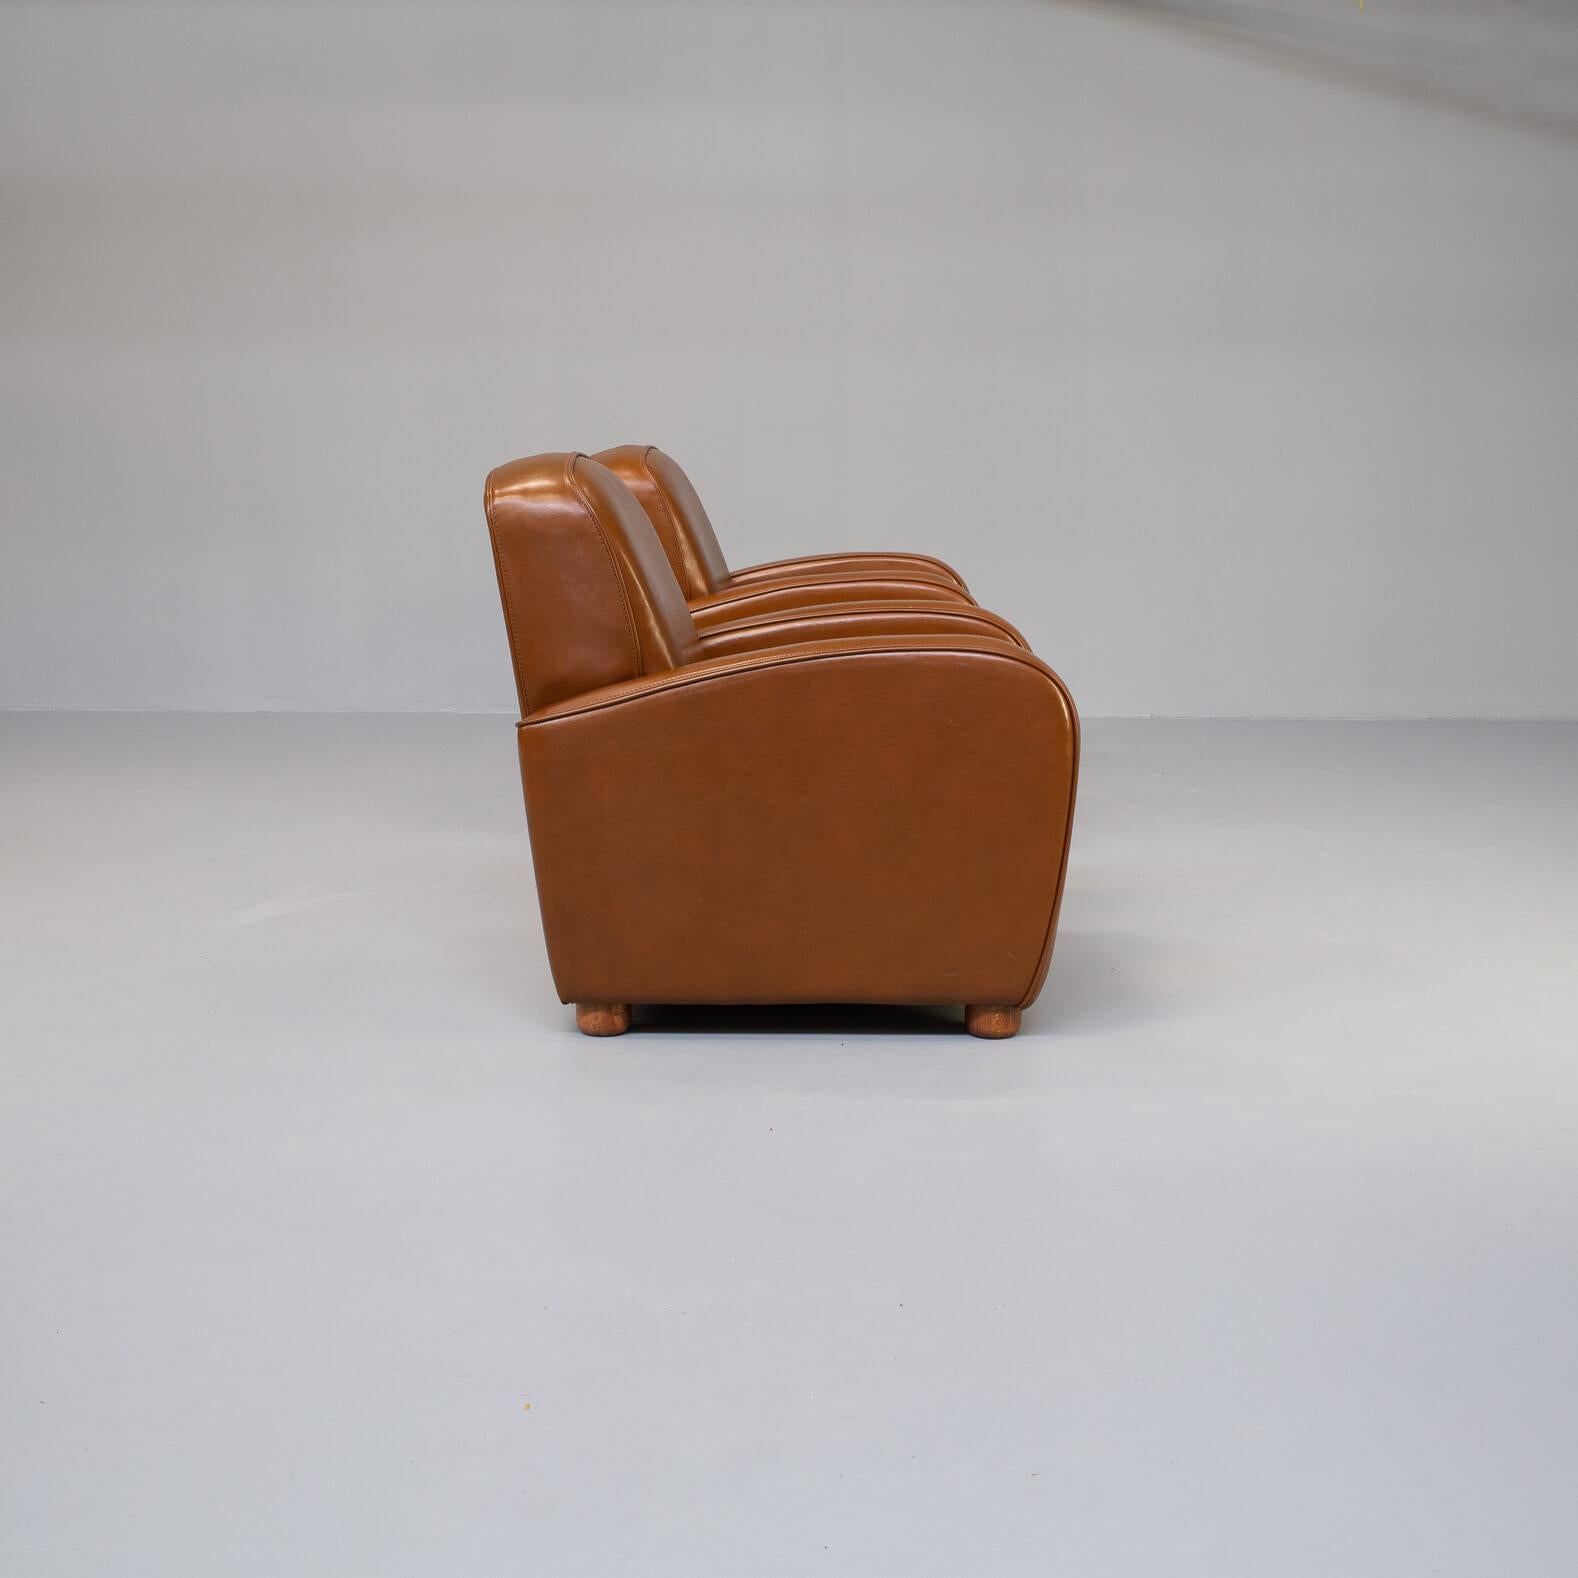 80s Cognac Leather Club Fauteuils for Idp Italia Set / 2 In Good Condition For Sale In Amstelveen, Noord